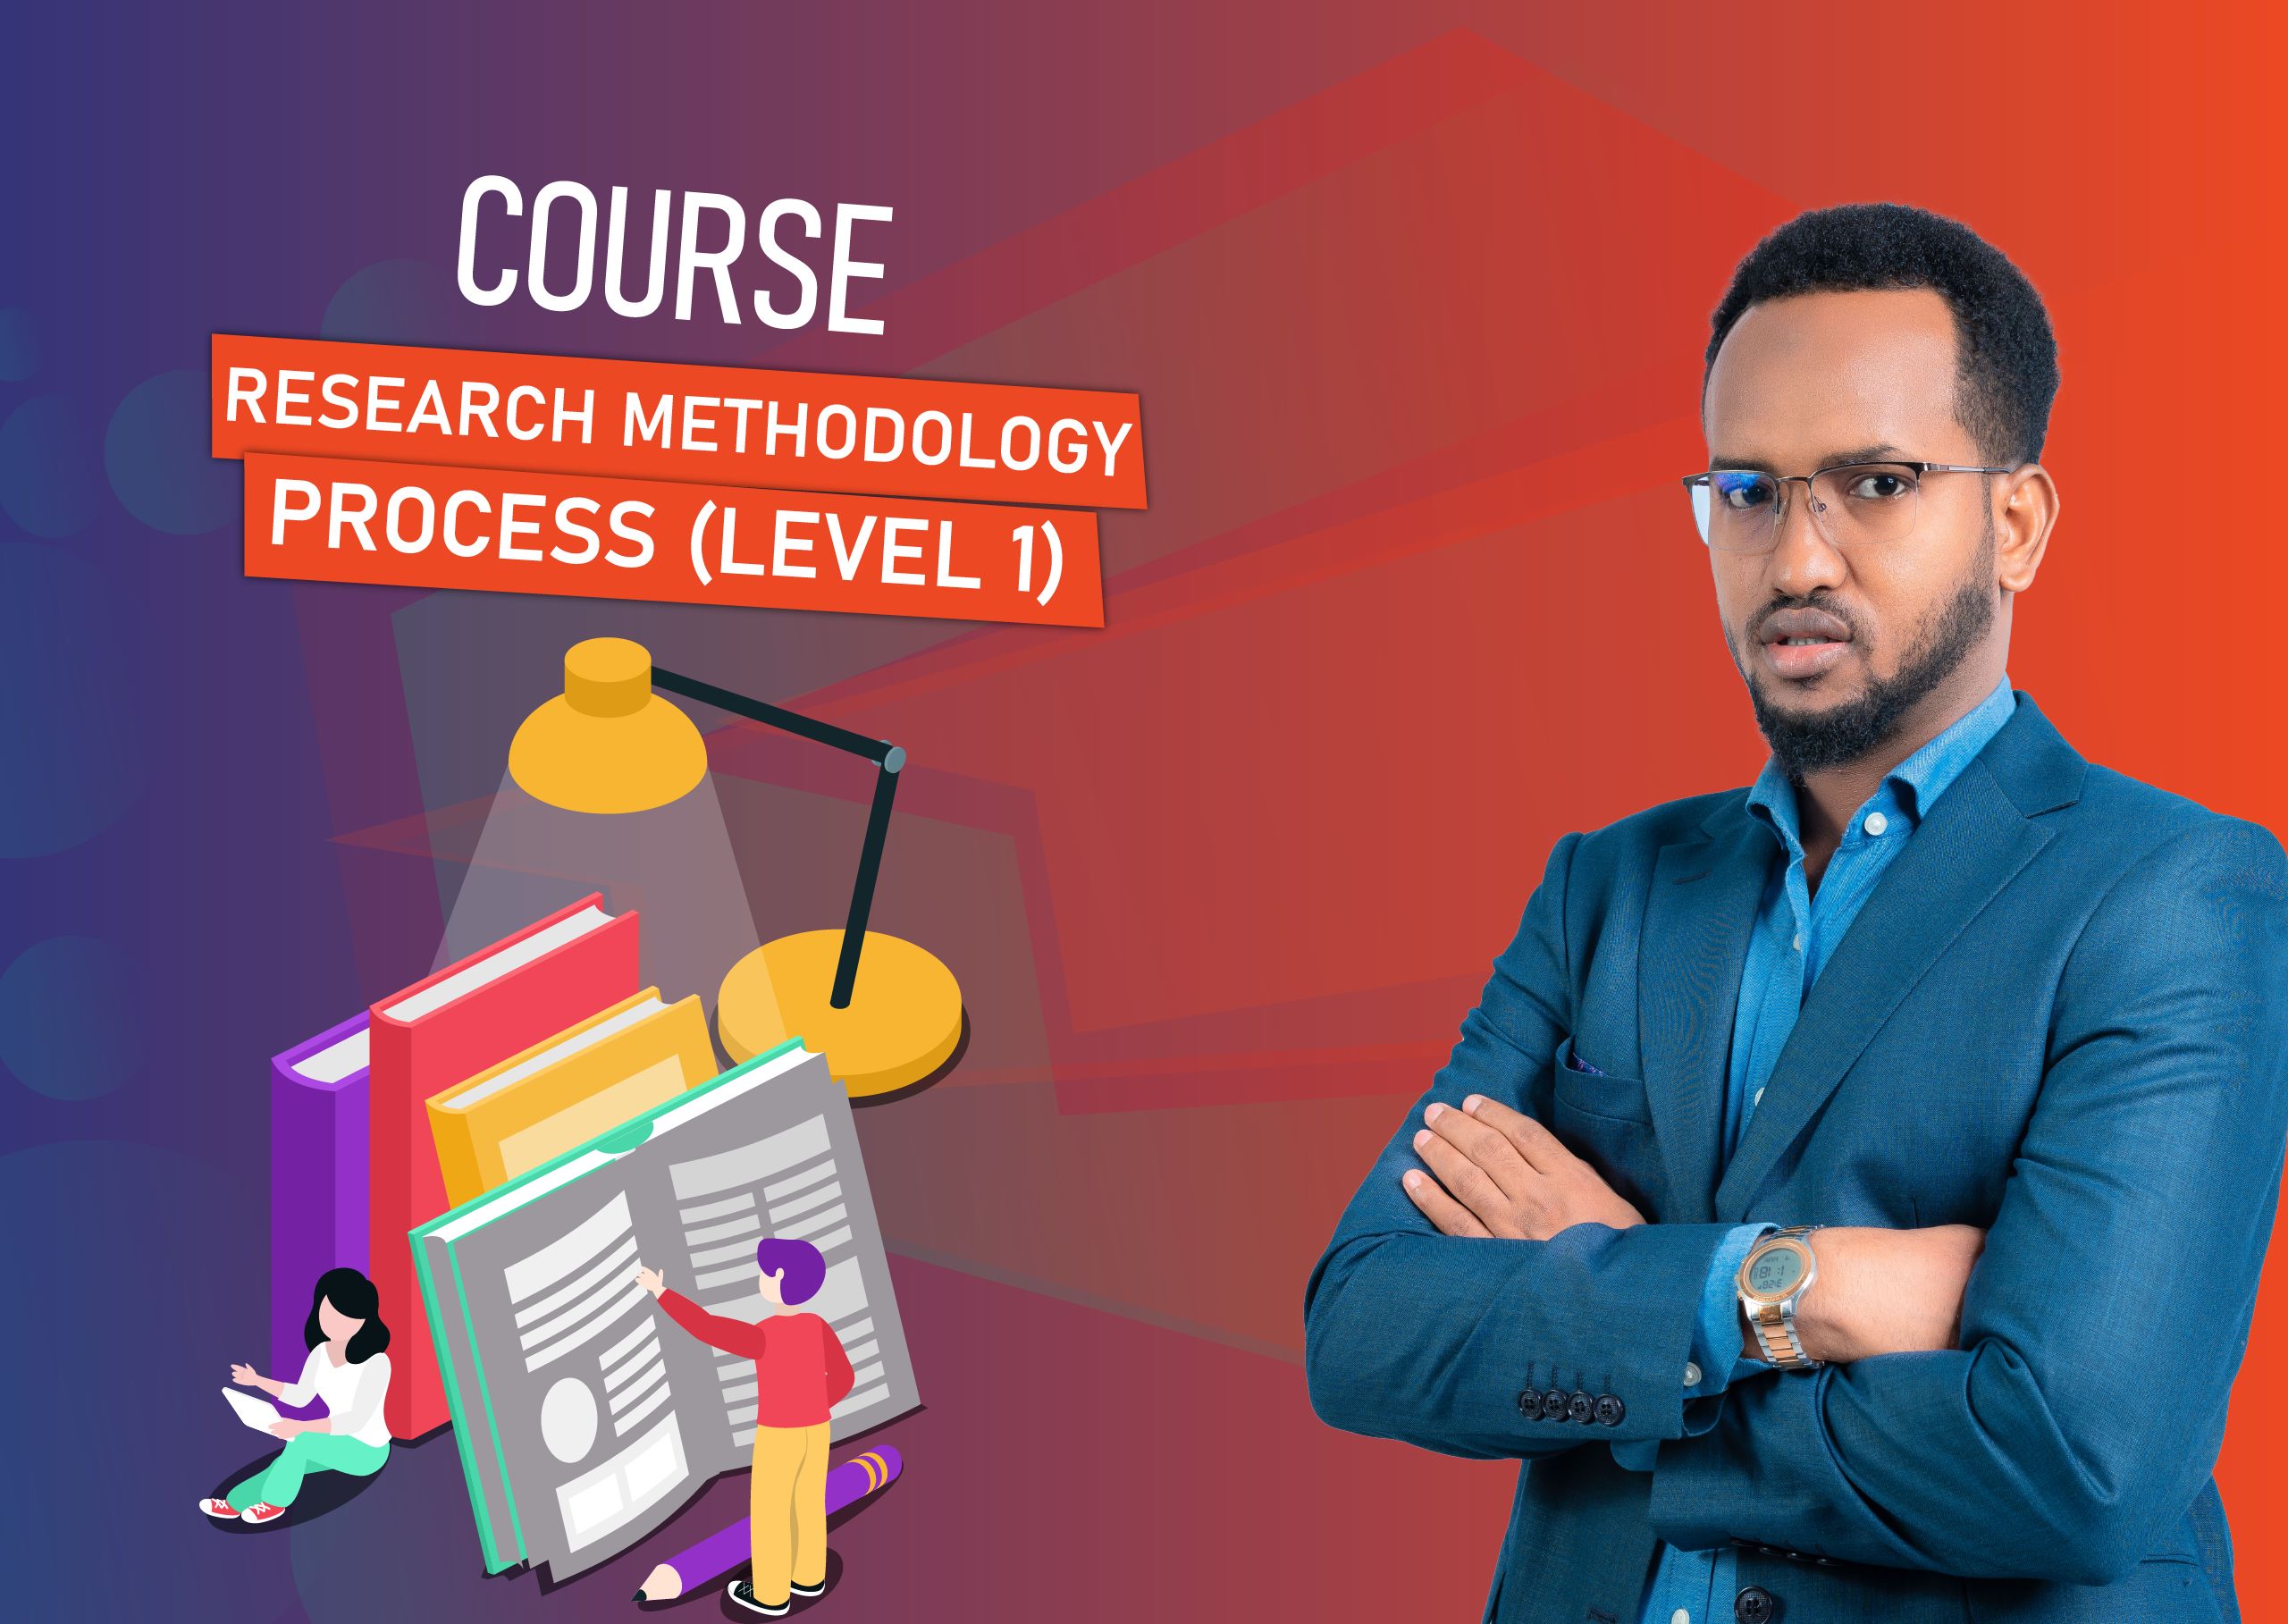 Research Methodology Process (Level 1)